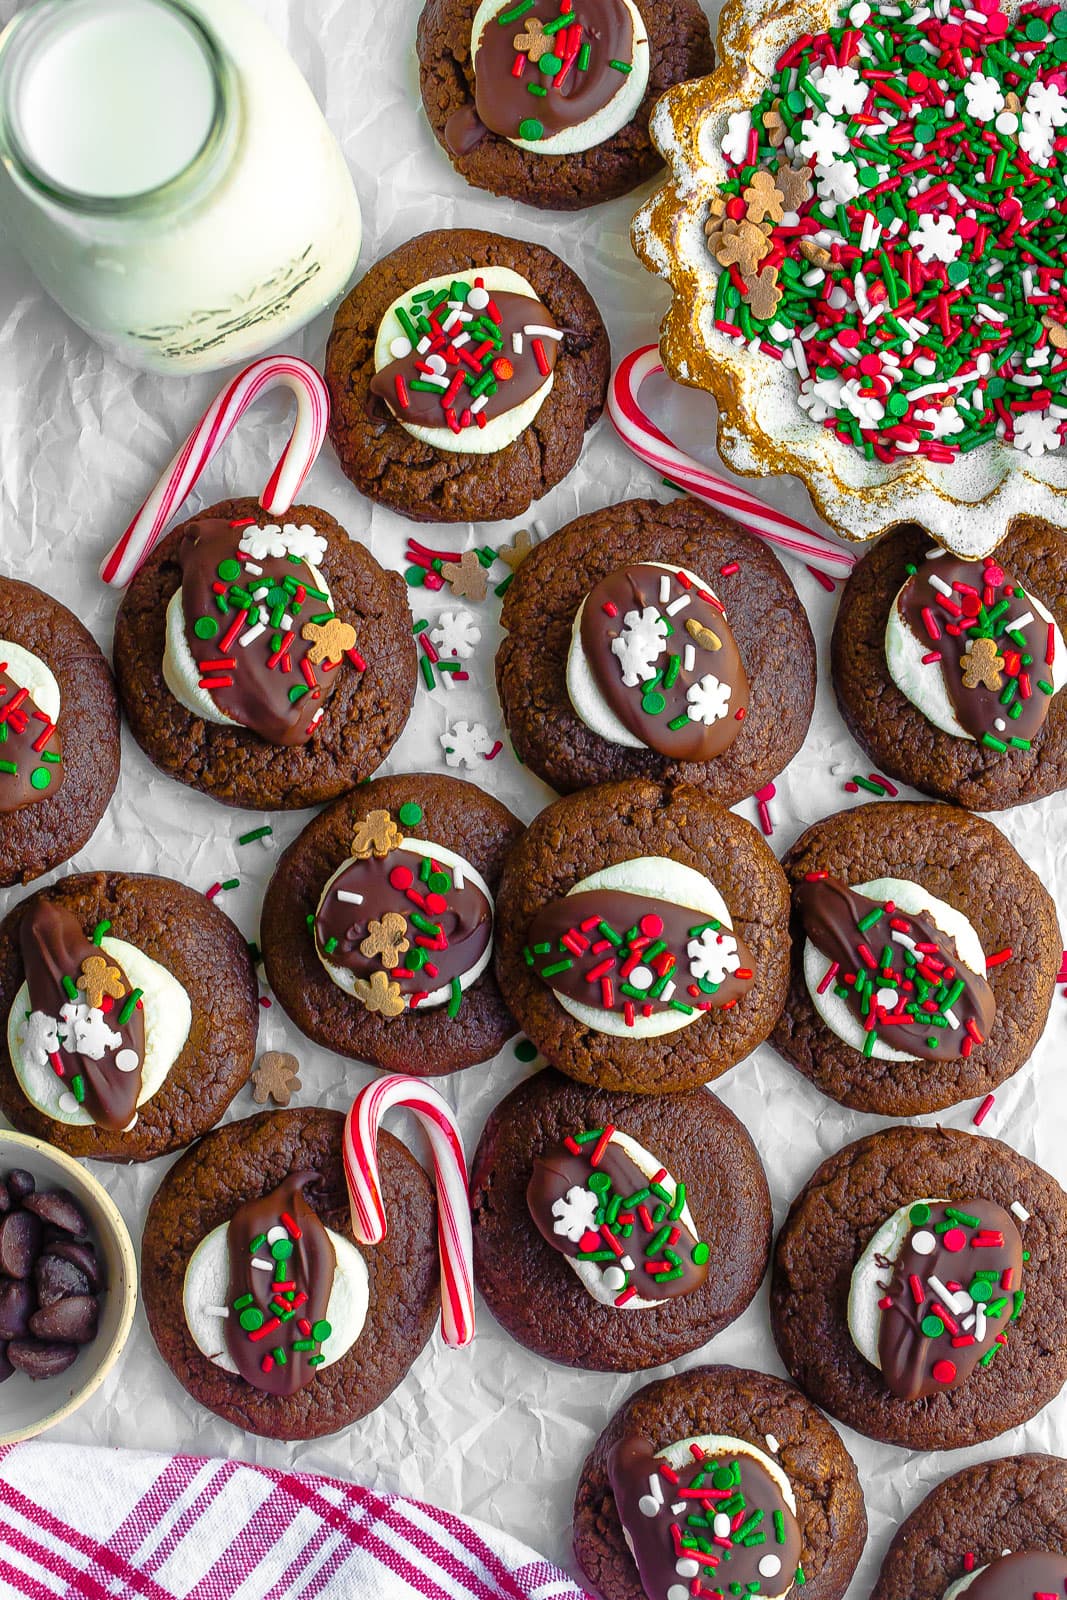 Hot chocolate cookies with candy canes and sprinkles.